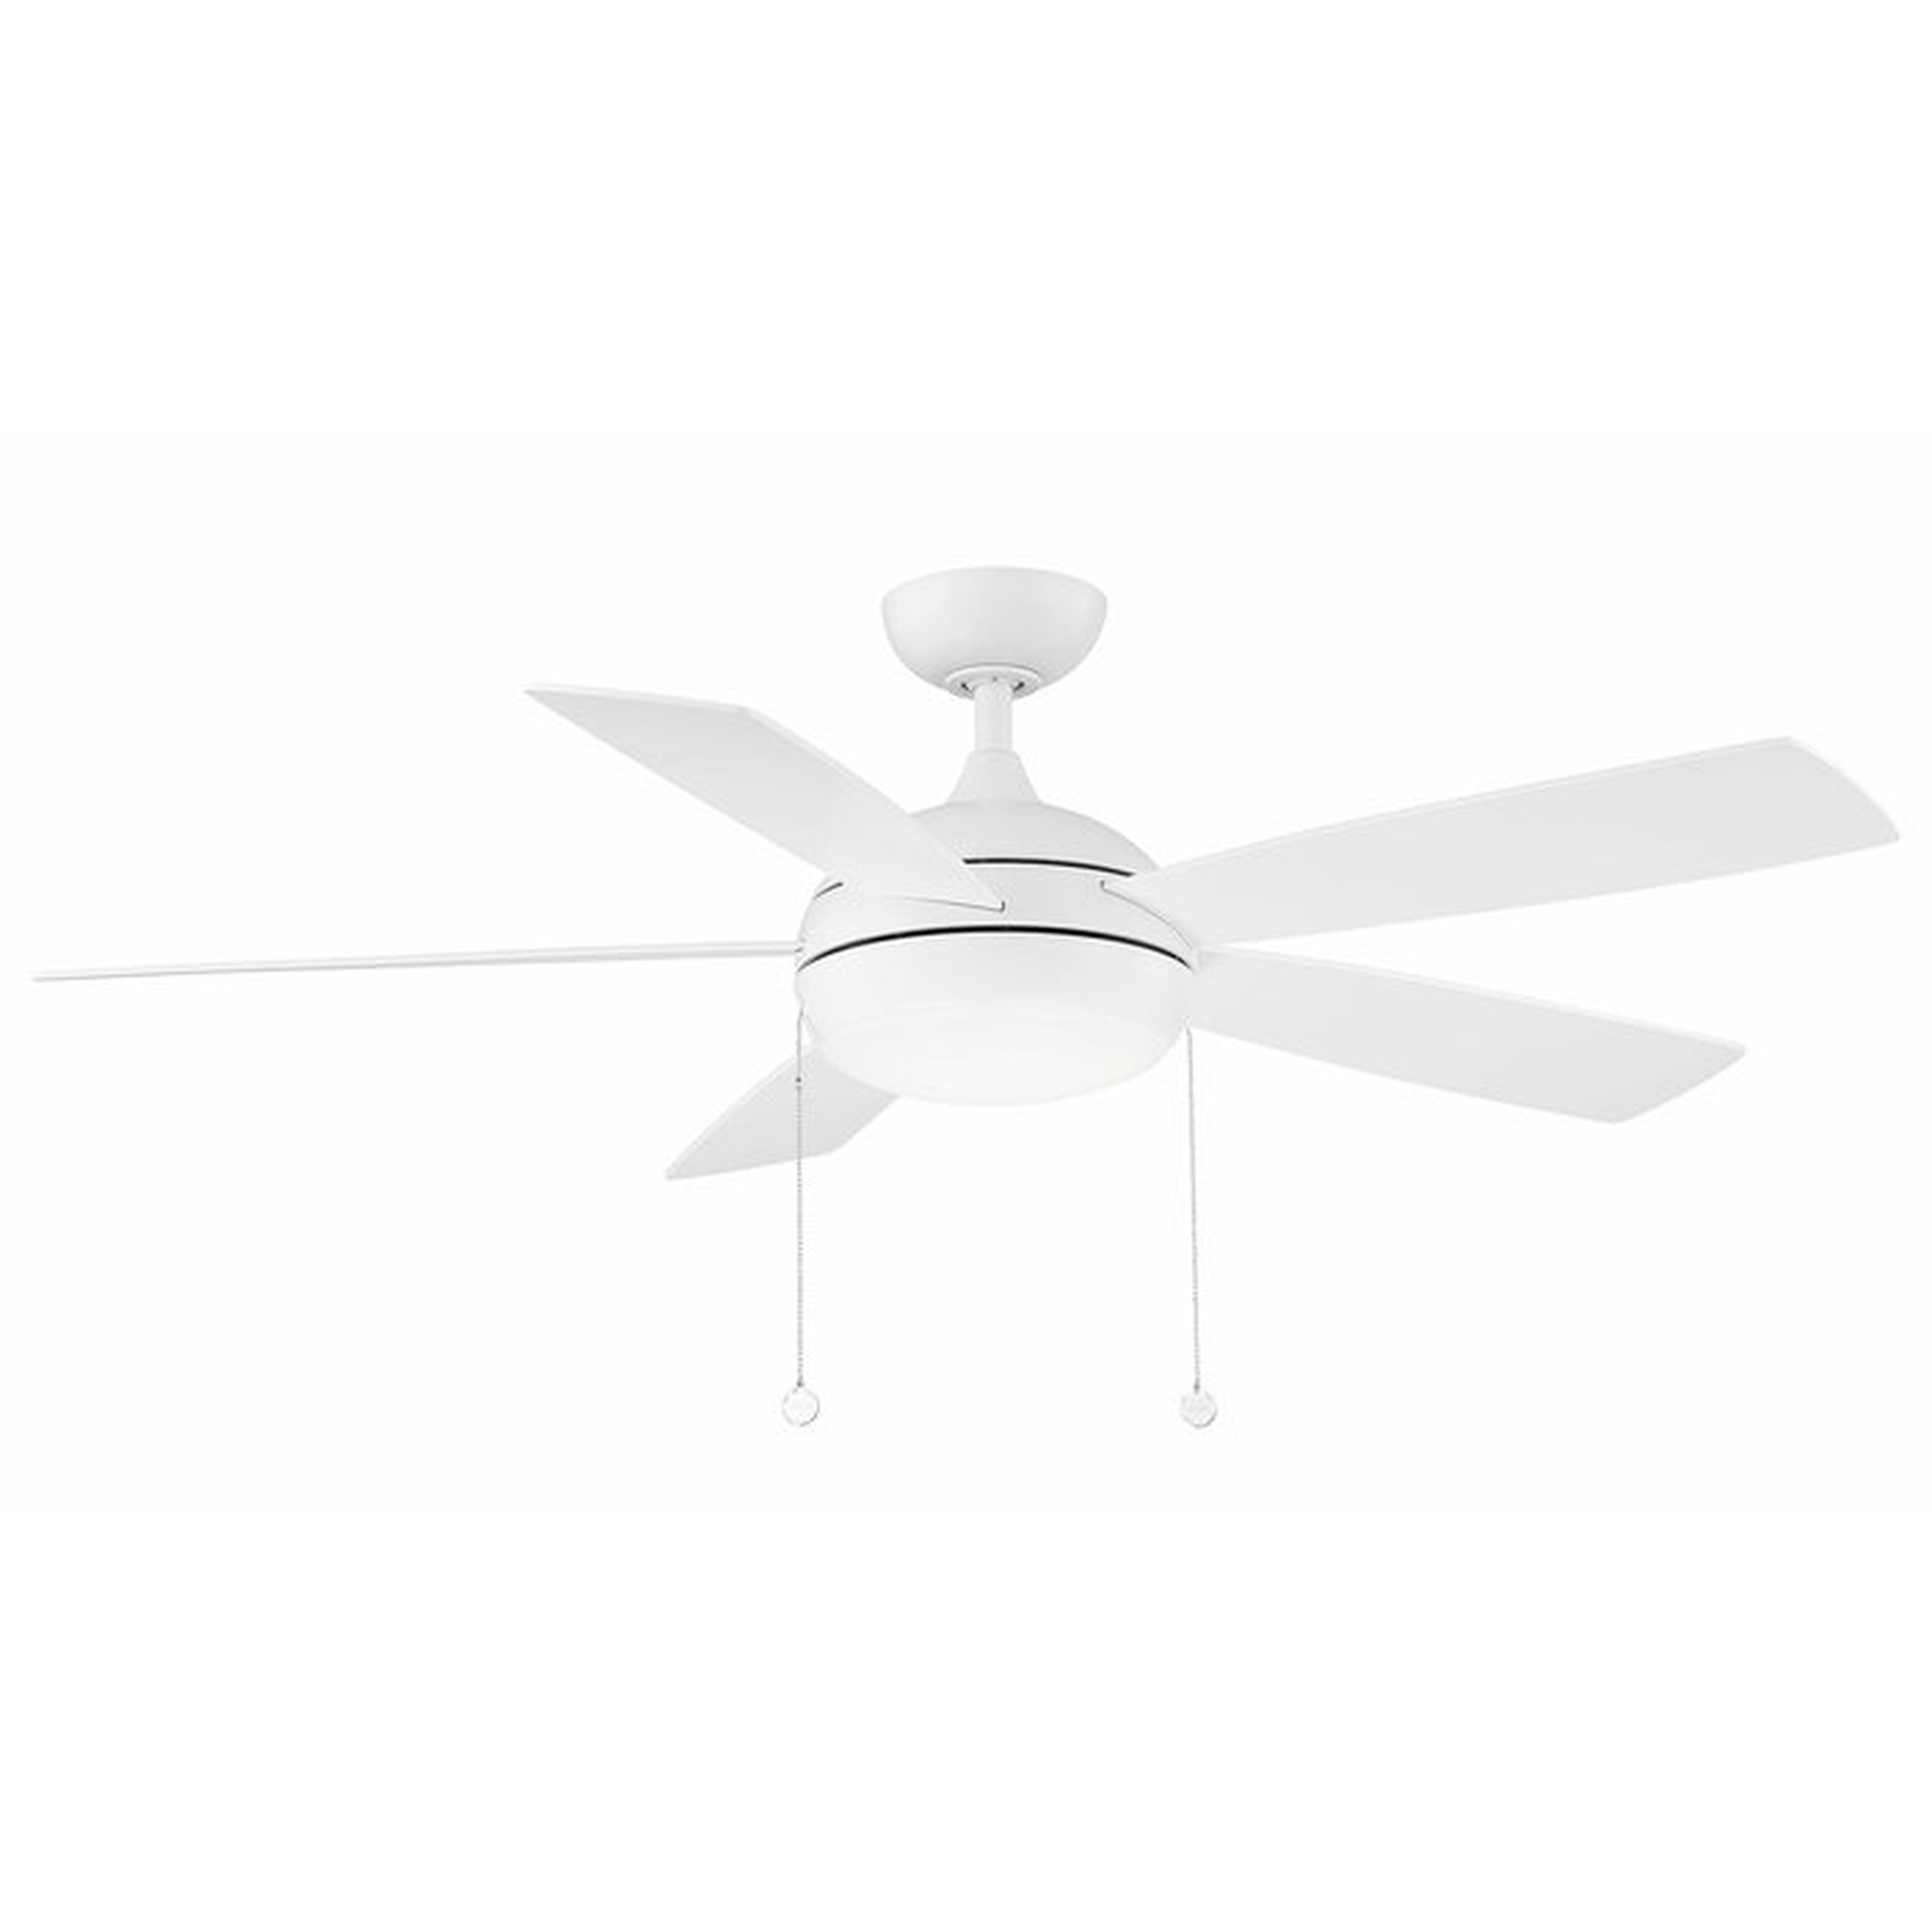 52" 5 - Blade Propeller Ceiling Fan with Pull Chain and Light Kit Included - Perigold